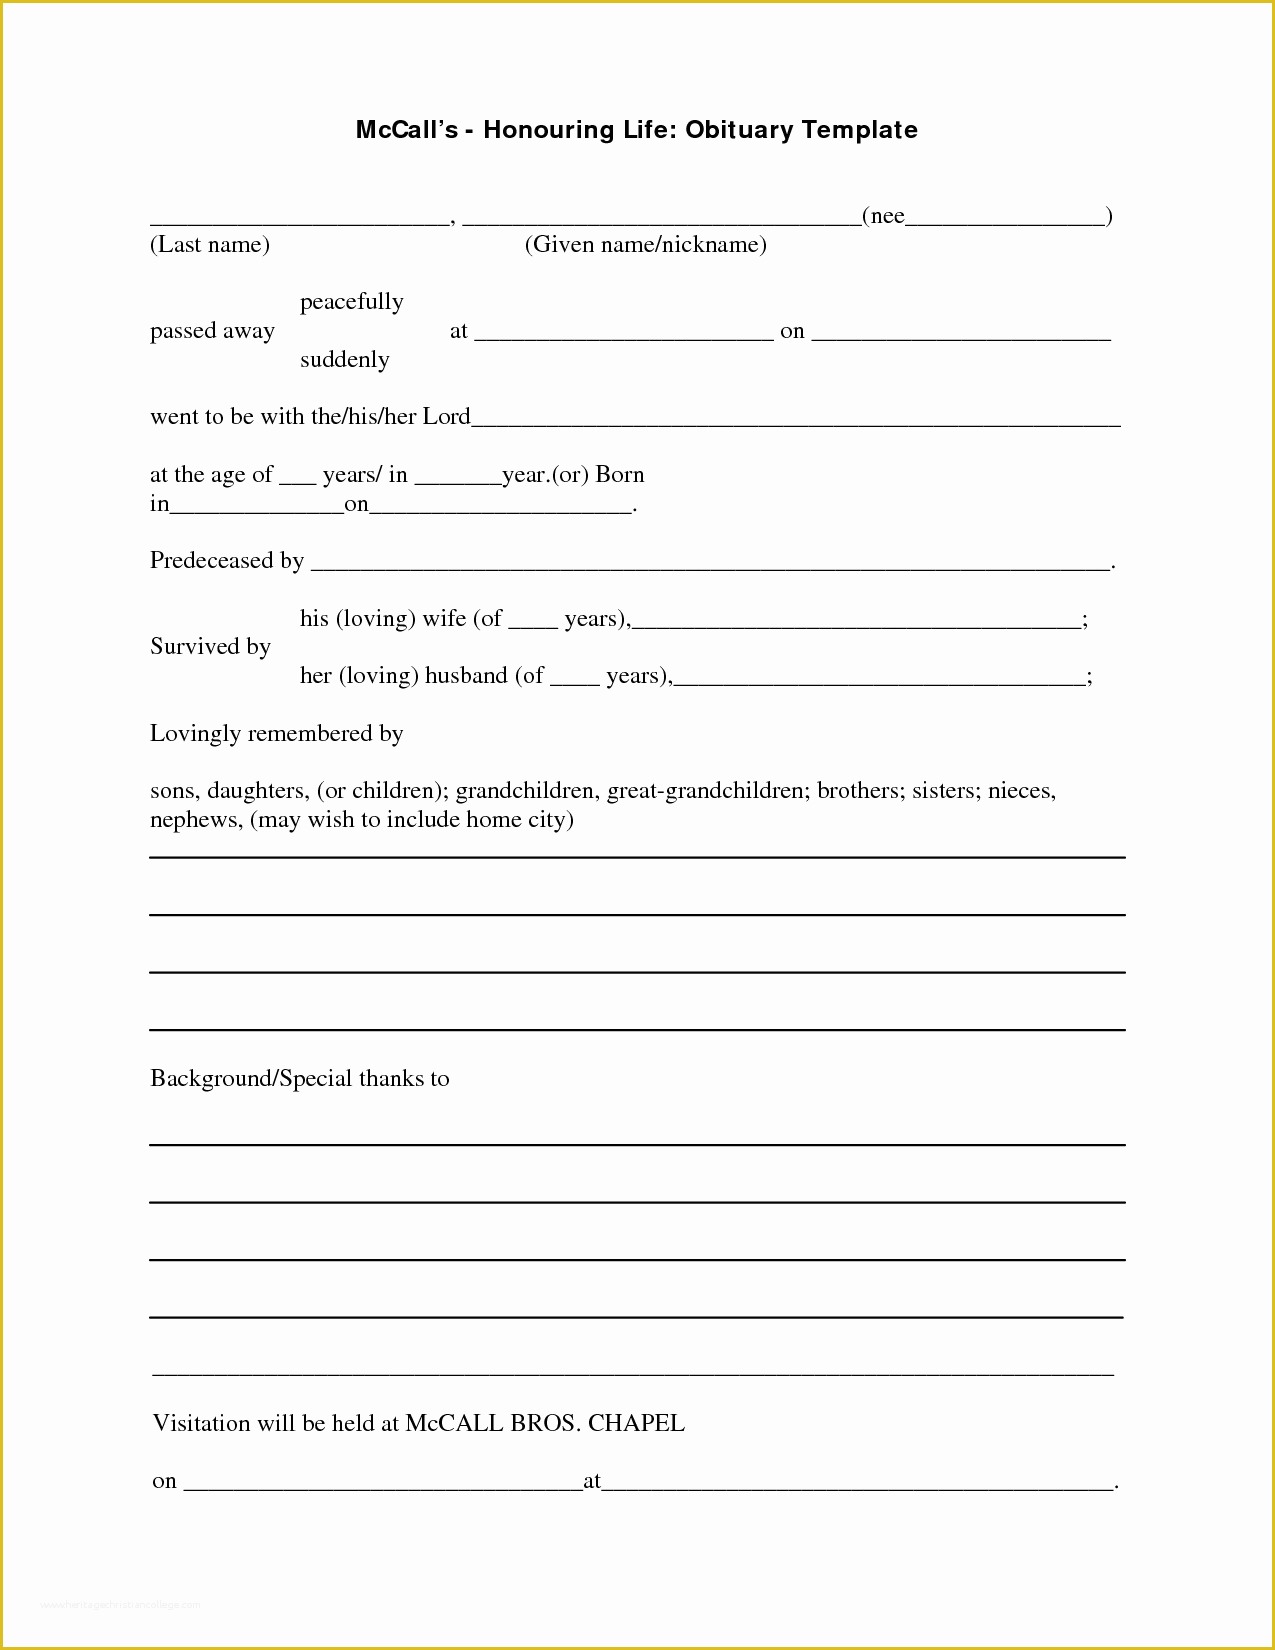 Free Obituary Template Download Of Best S Of Obituary Outline Program Sample Obituary